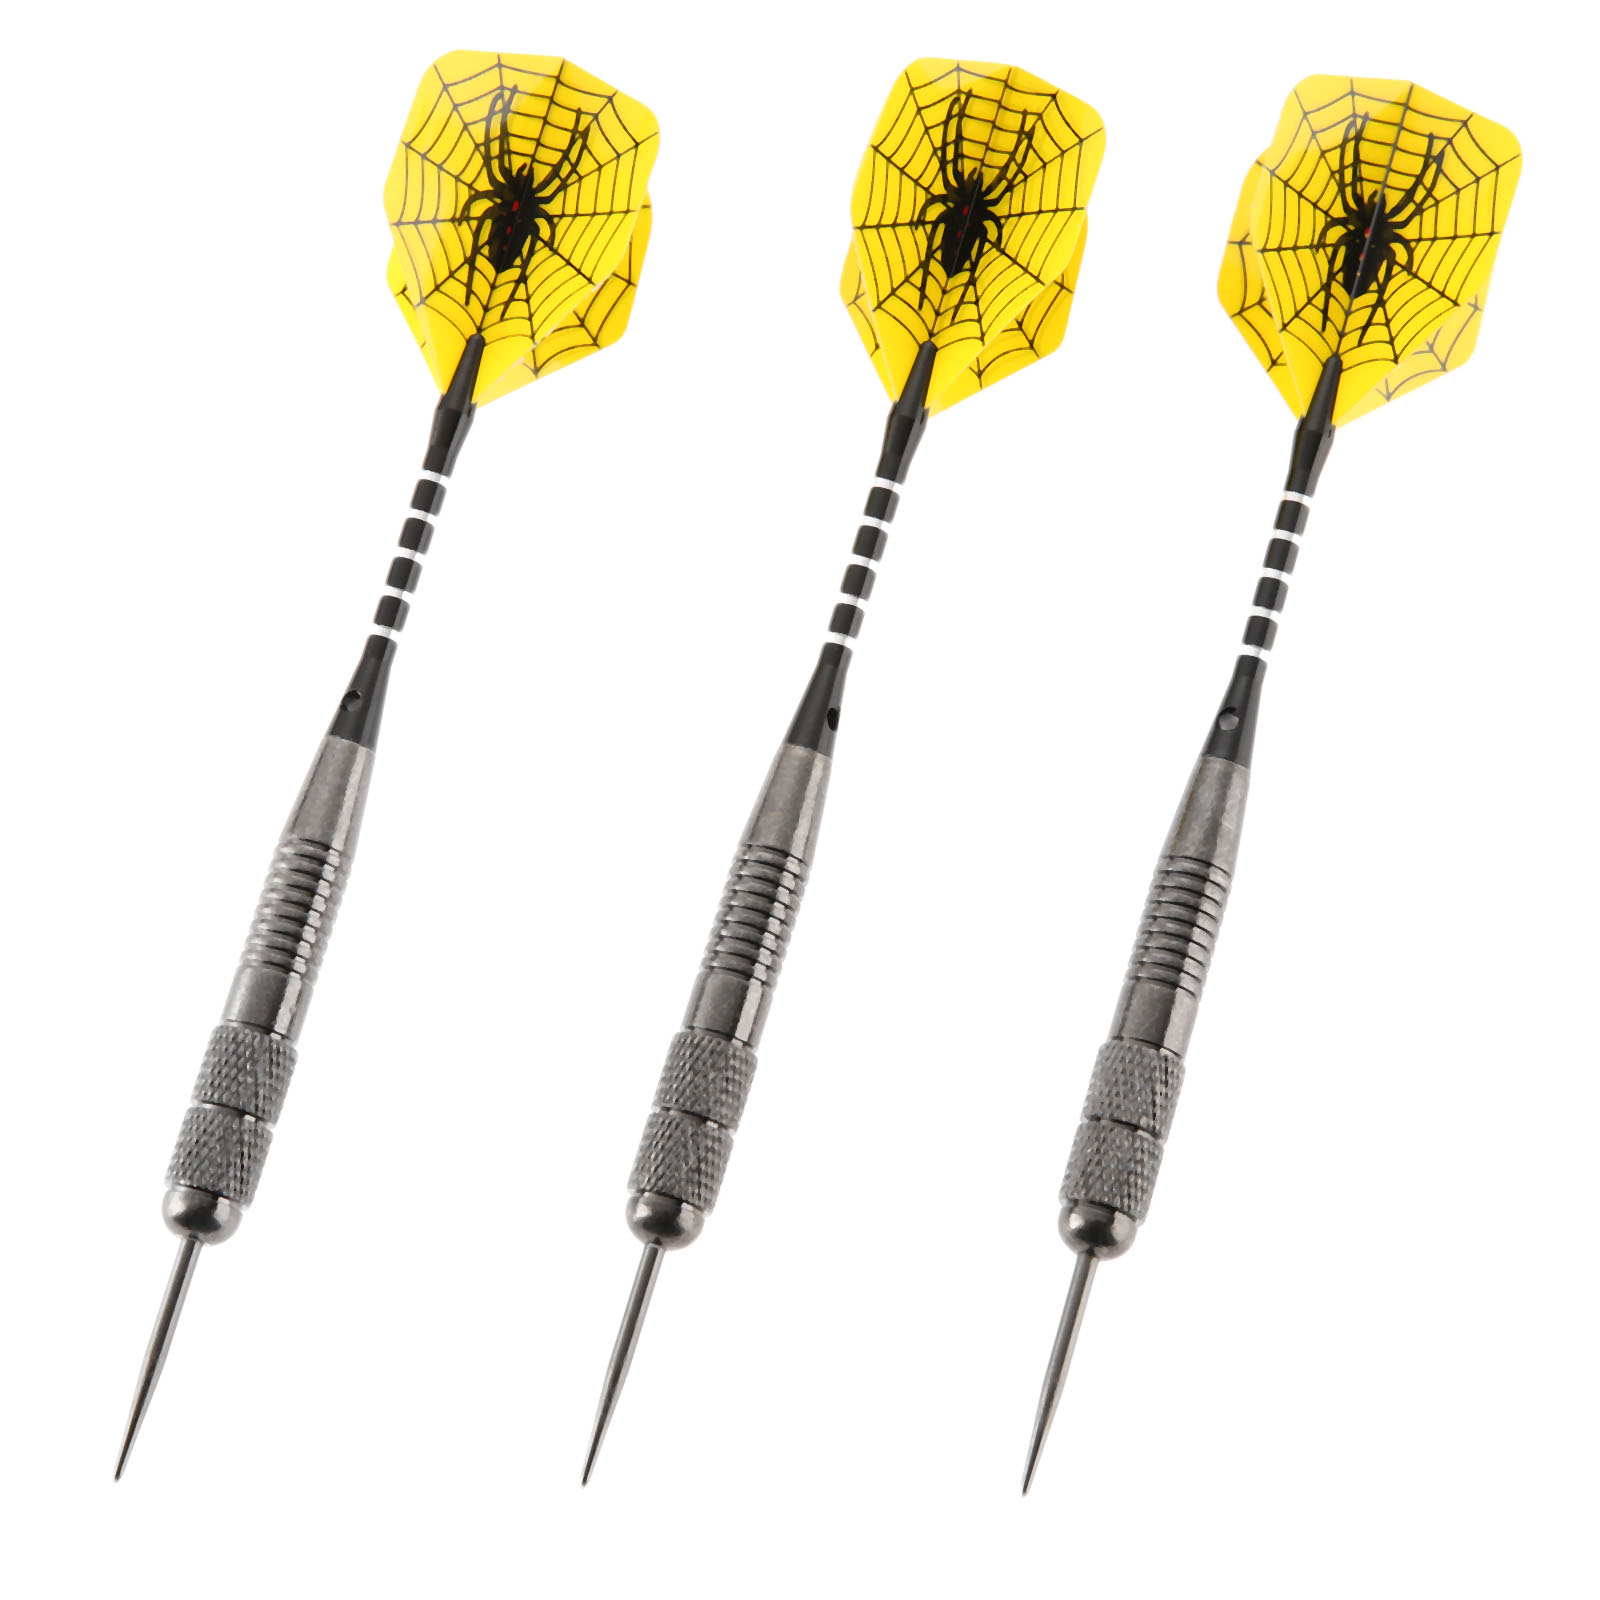 3pcs/Box Steel Tip Darts 26g Packaged Darts Set with Aluminum and Plastic Shafts